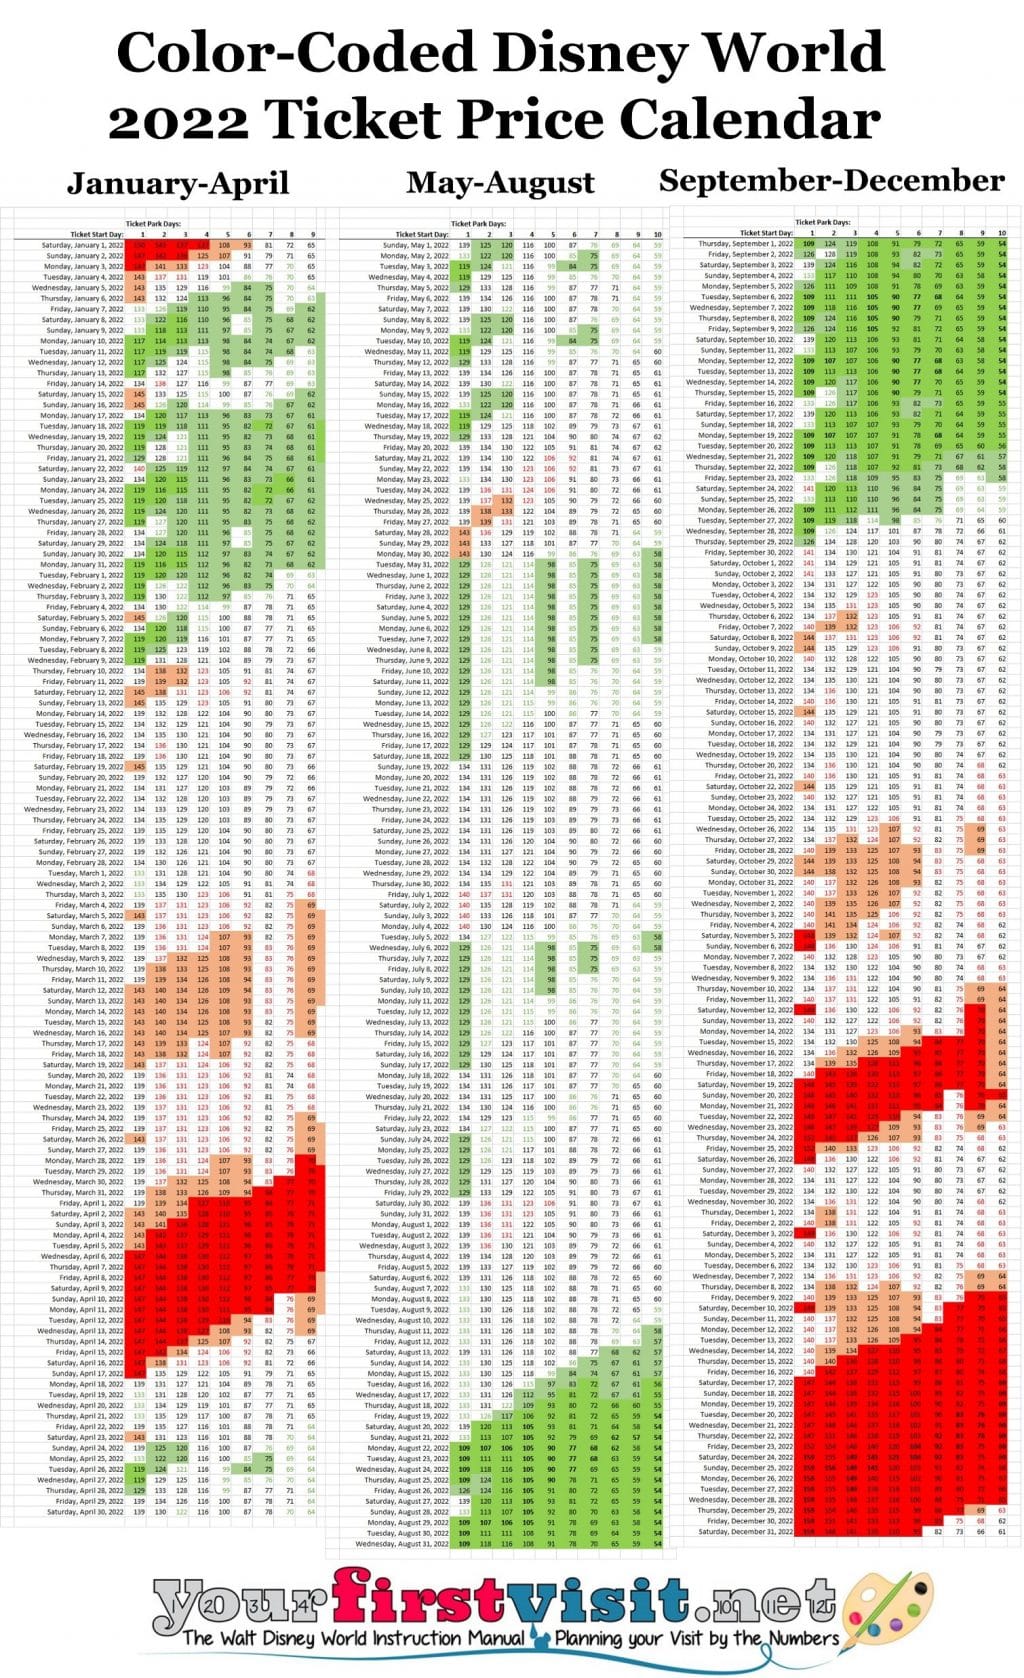 Disney World Crowd Calendar 2022 By Park Disney World 2022 Ticket Prices In A Color-Coded Calendar -  Yourfirstvisit.net